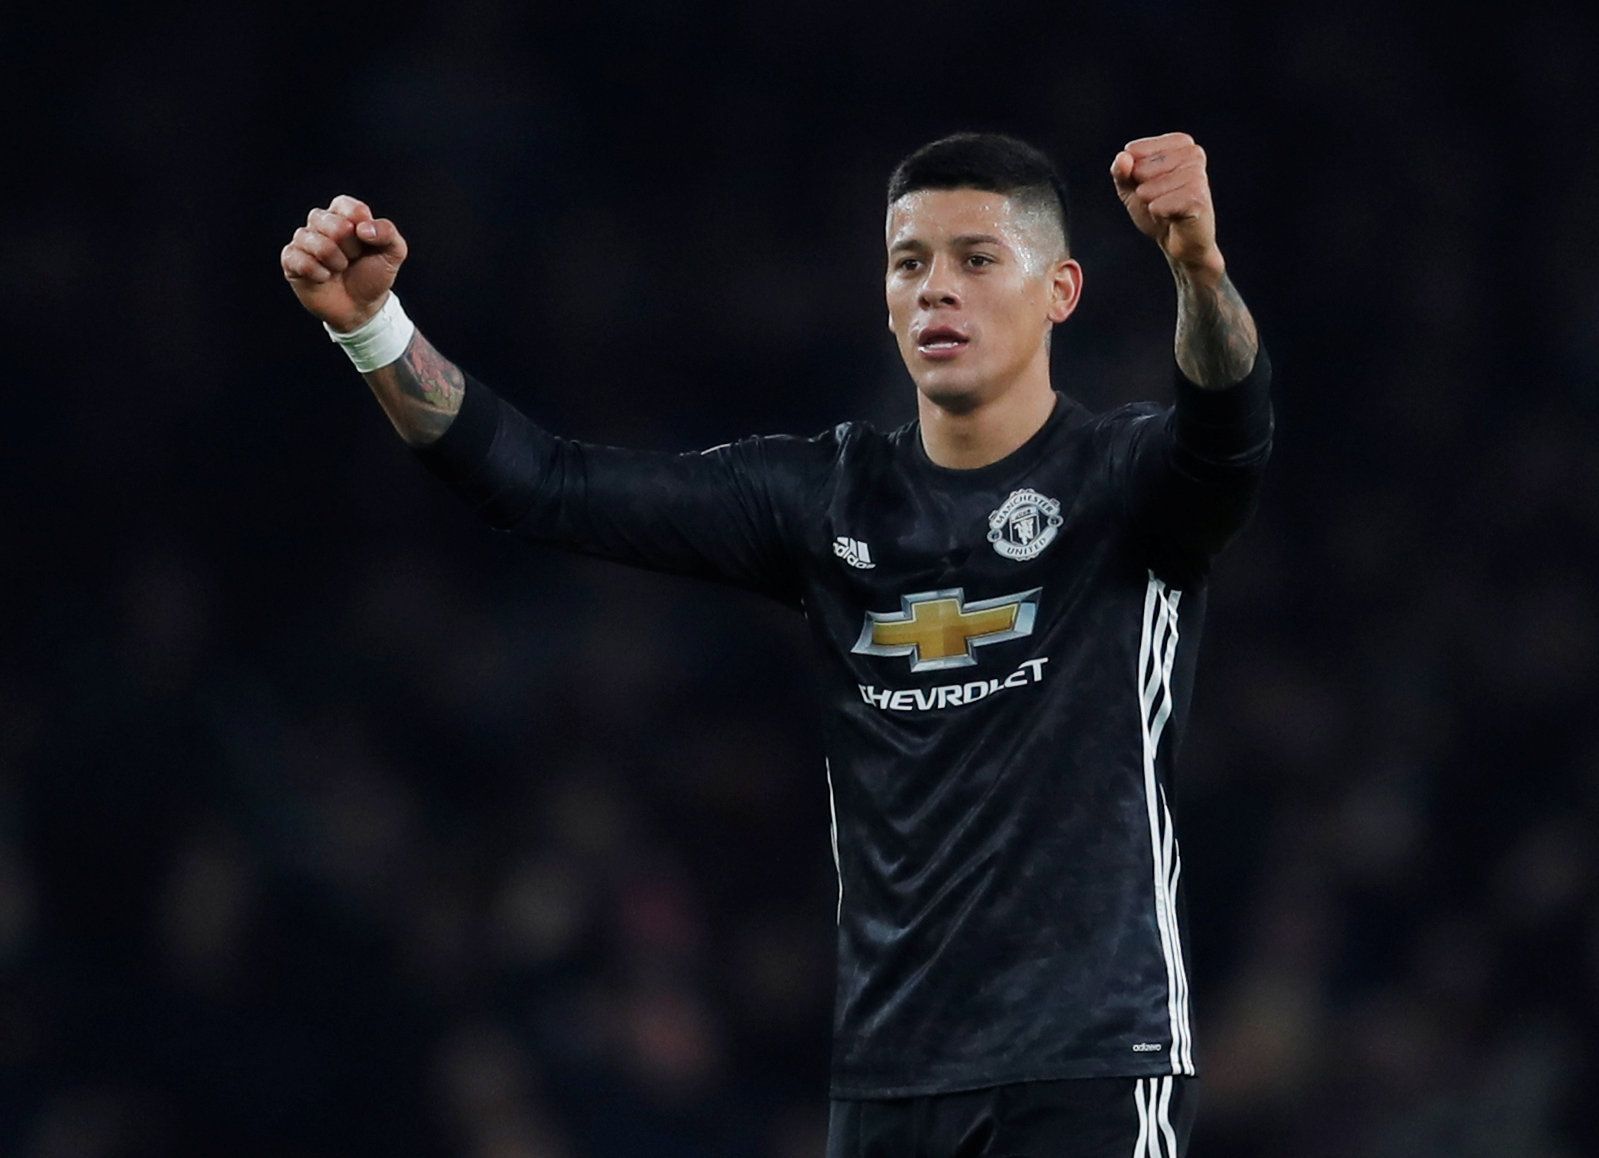 Soccer Football - Premier League - Arsenal vs Manchester United - Emirates Stadium, London, Britain - December 2, 2017   Manchester United's Marcos Rojo celebrates   Action Images via Reuters/Andrew Couldridge    EDITORIAL USE ONLY. No use with unauthorized audio, video, data, fixture lists, club/league logos or 